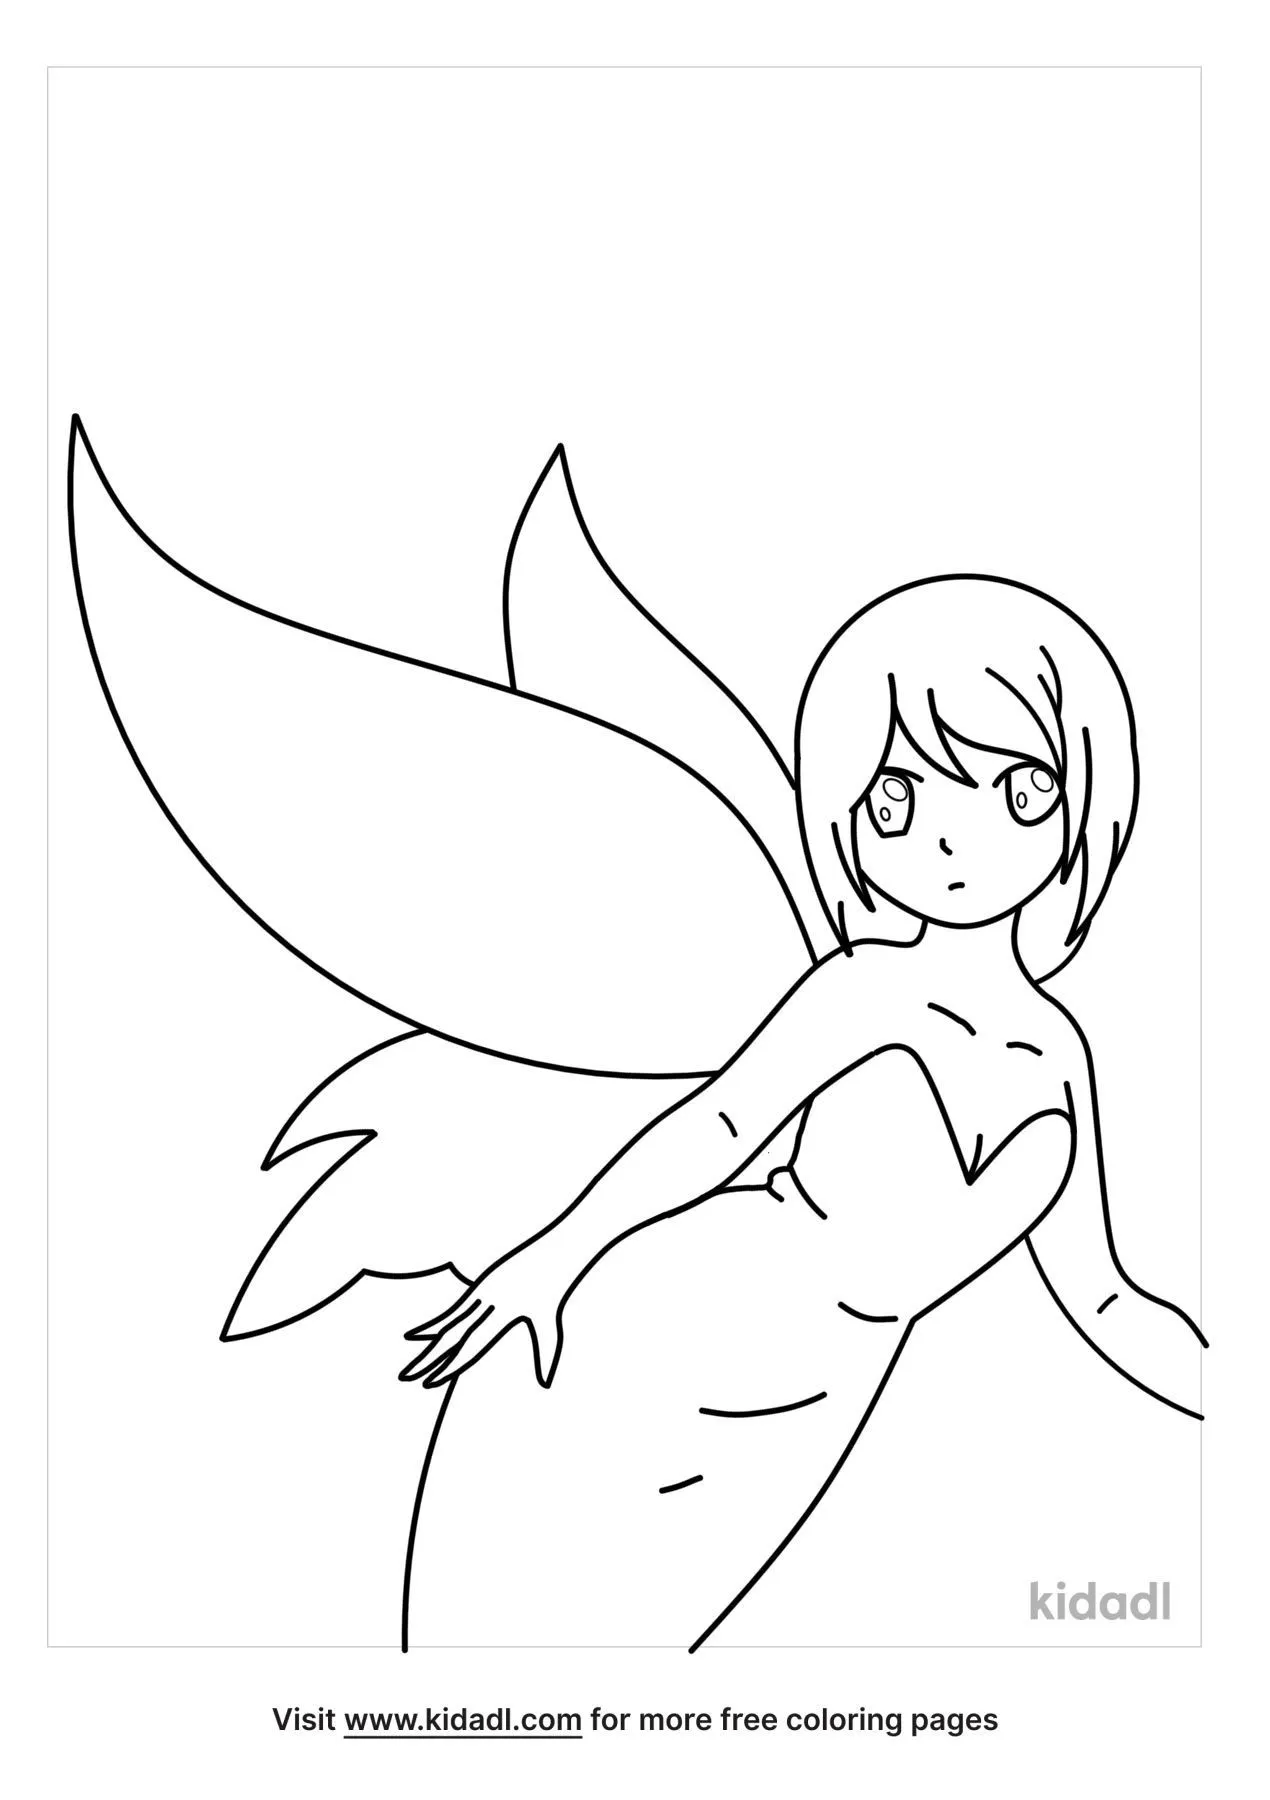 Free Anime Fairy Girl Coloring Page | Coloring Page Printables | Kidadl